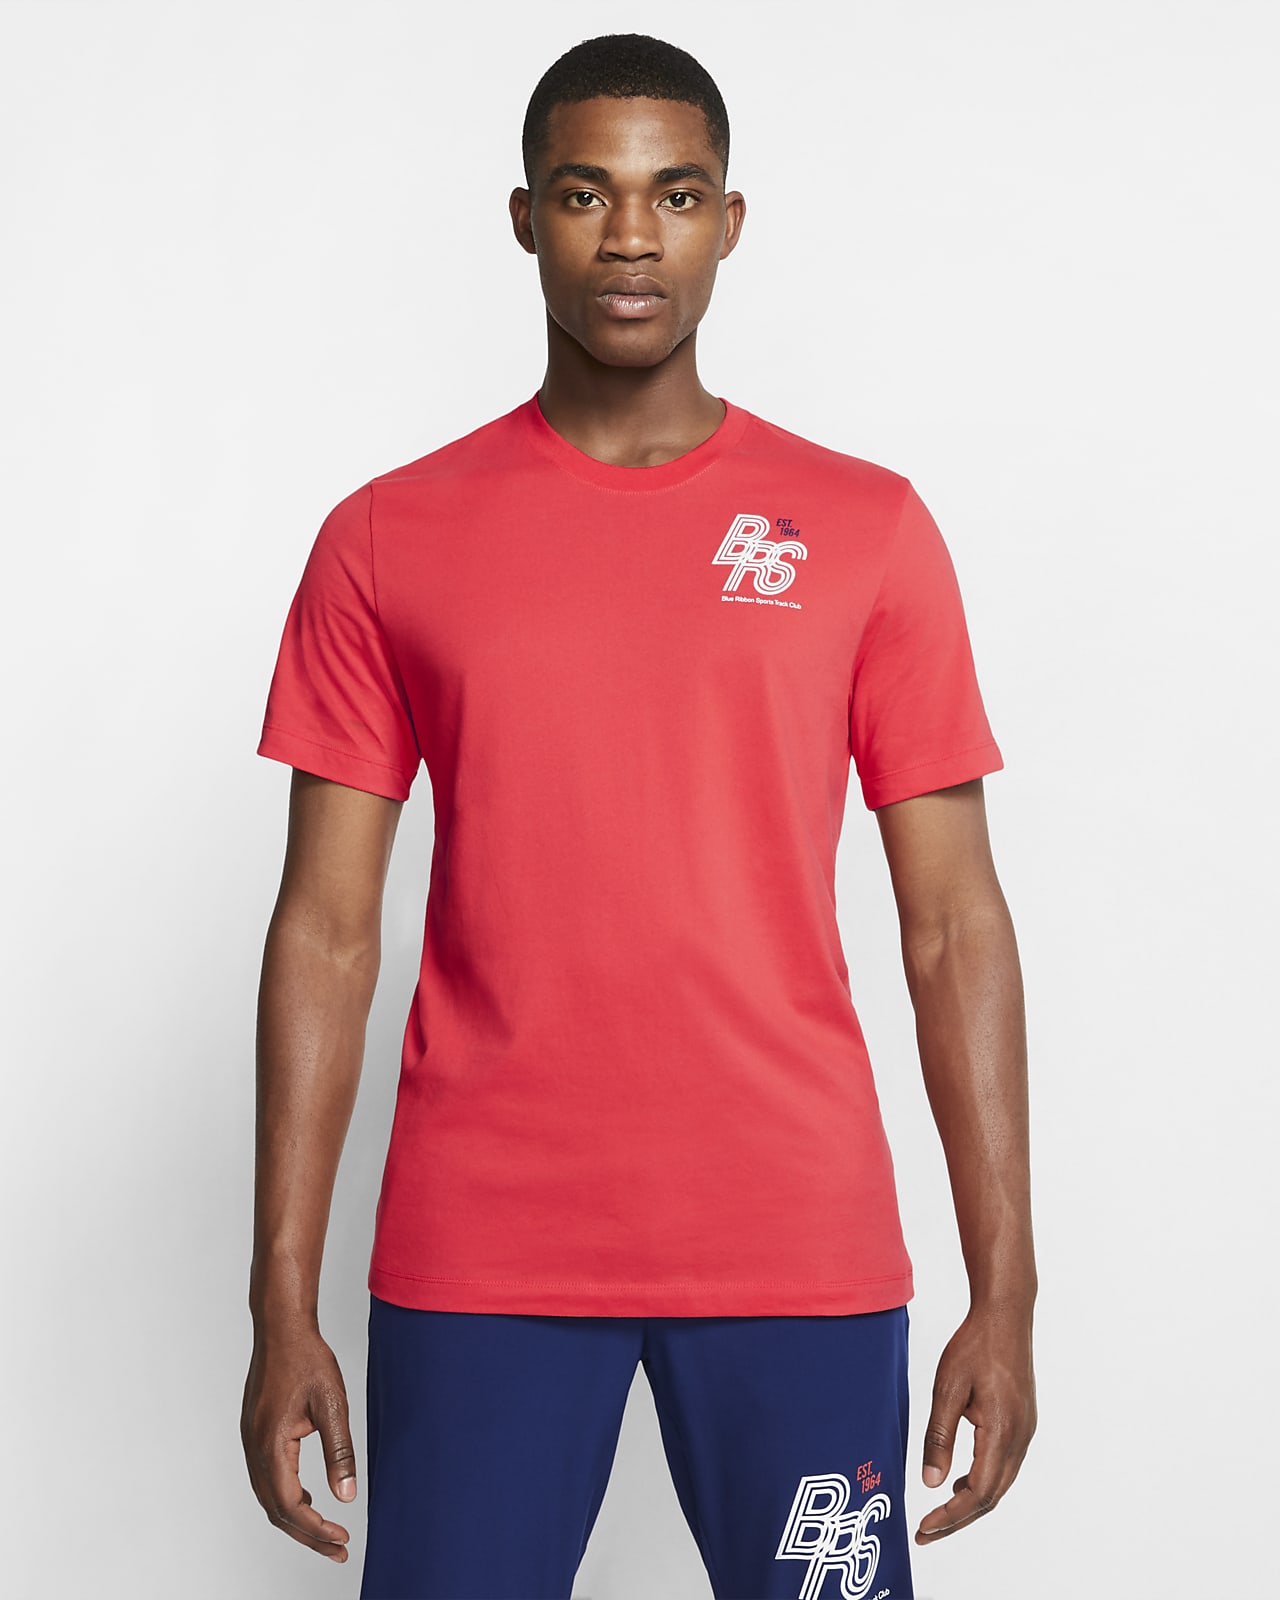 blue and red nike shirt